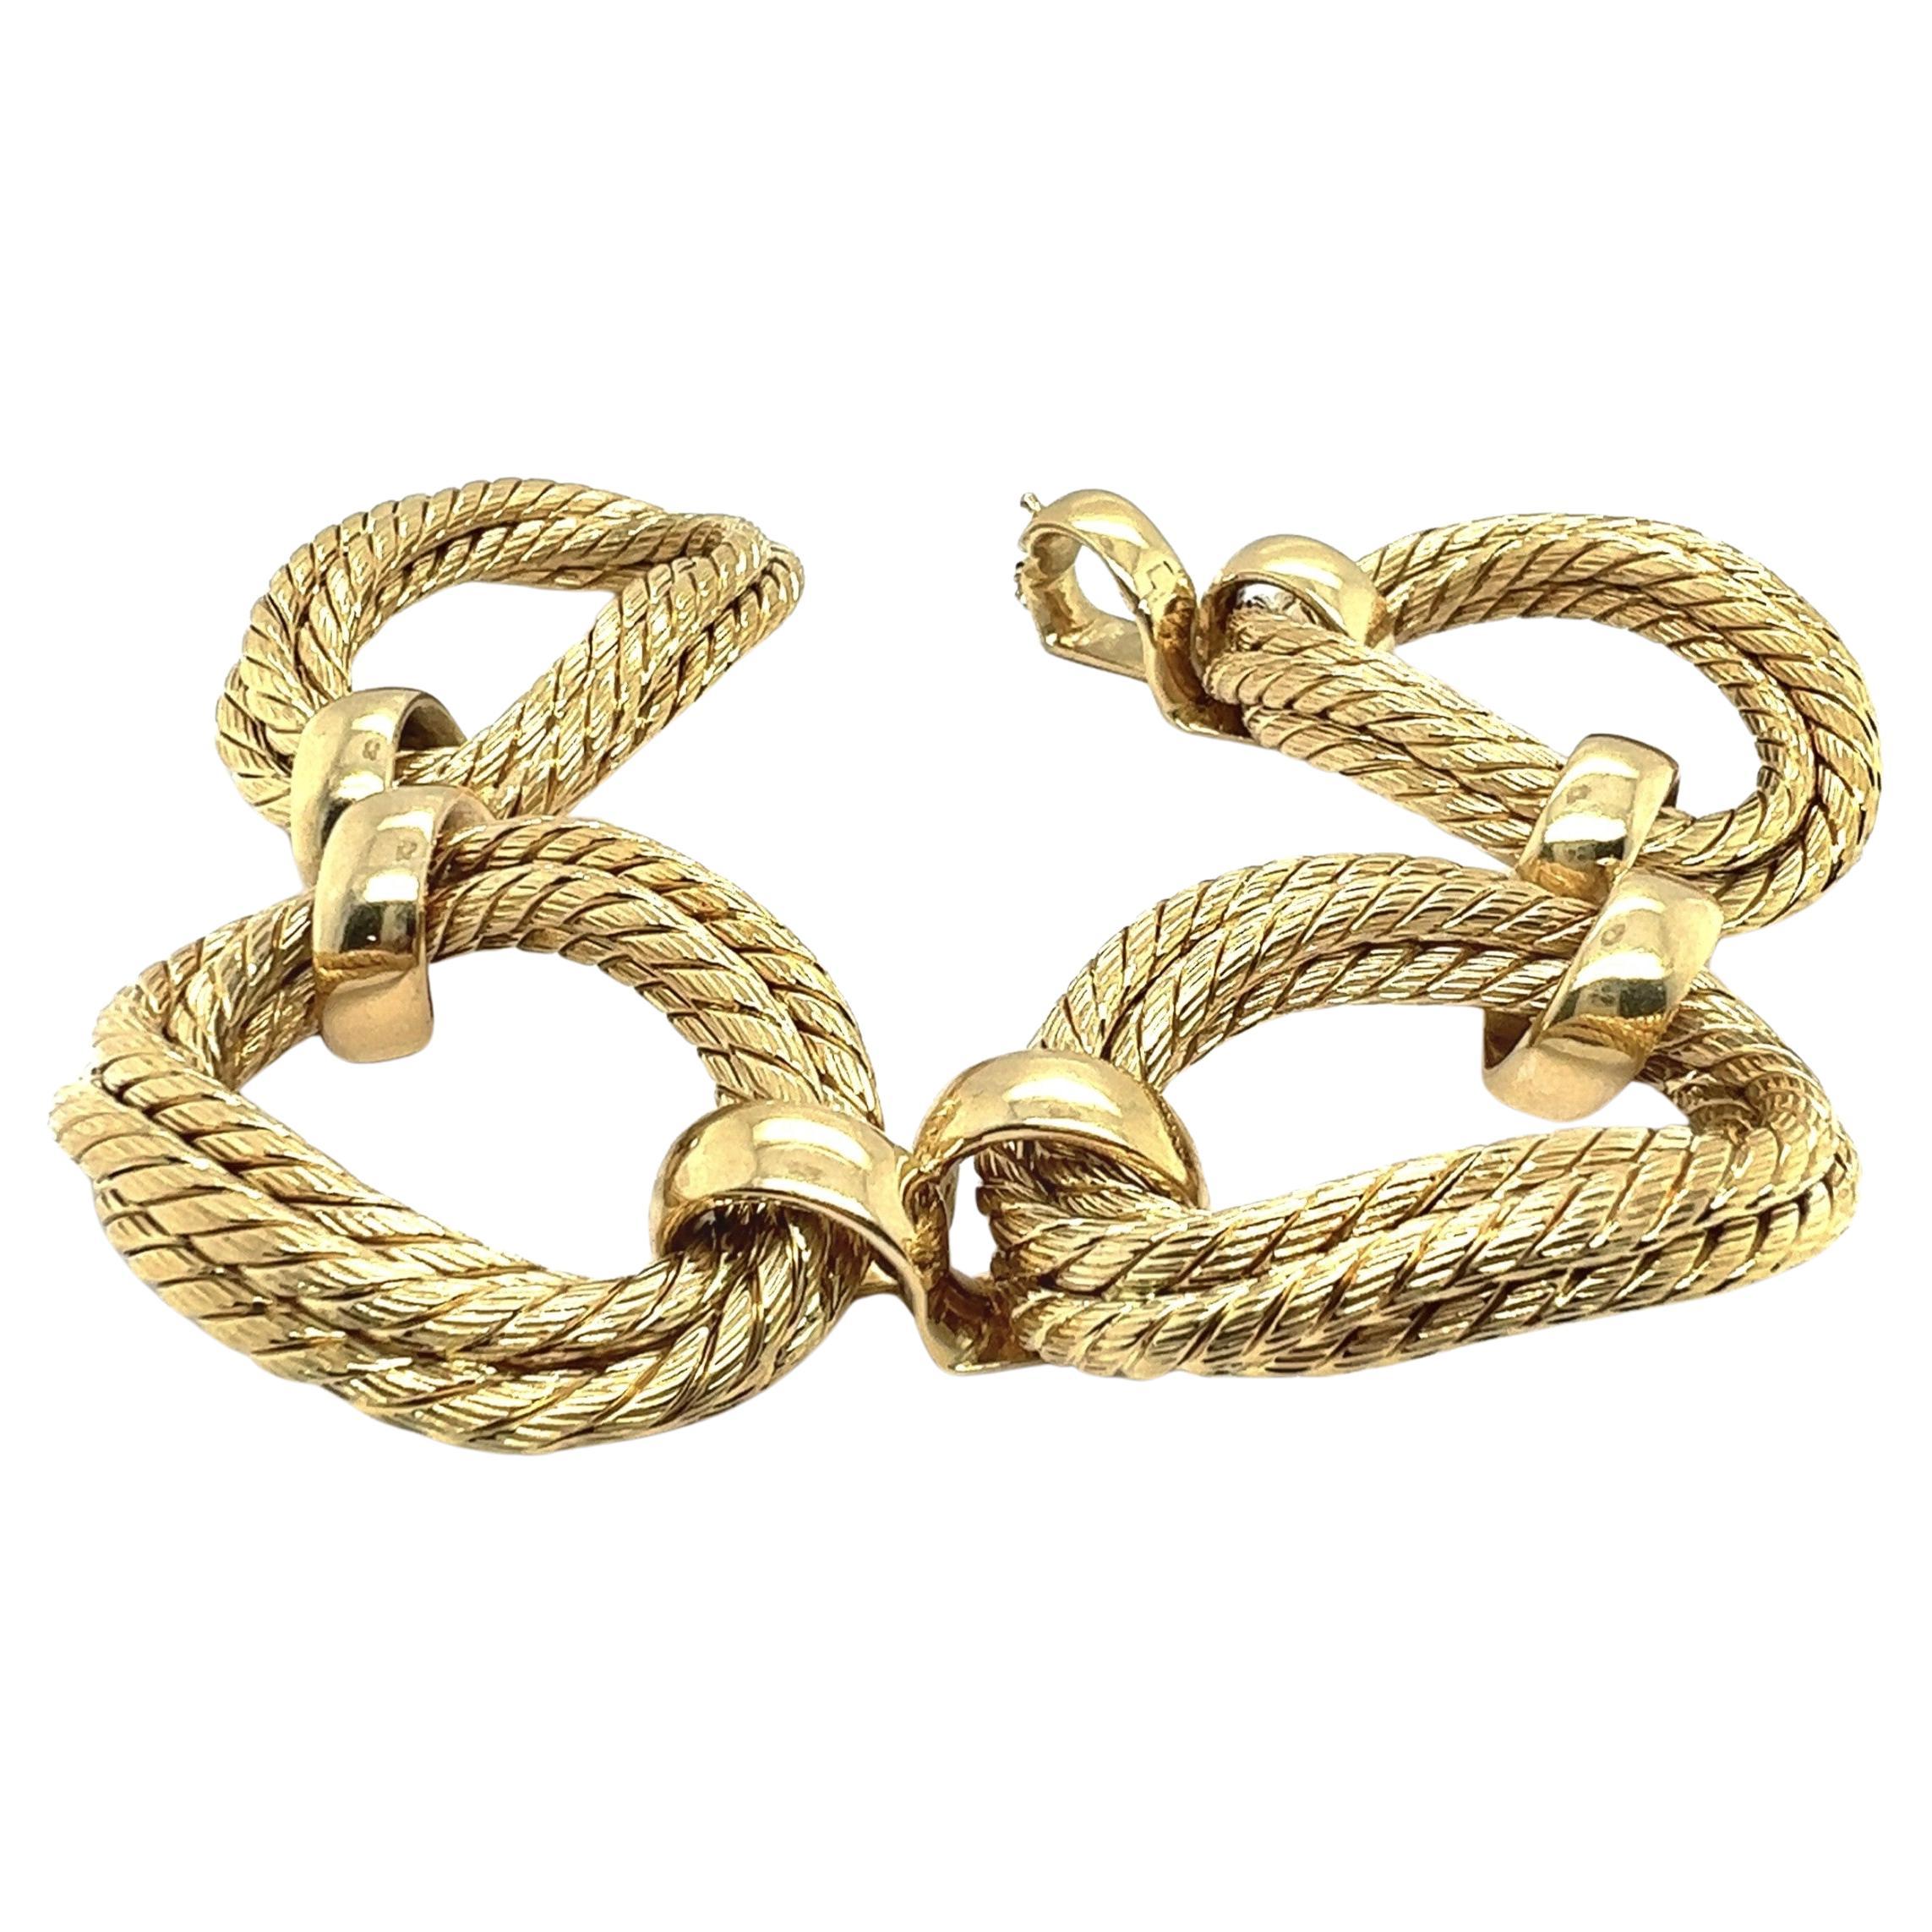 Introducing a bracelet in 18 Karat yellow gold —a striking piece composed of four links elegantly fastened with graceful clips and a secure clasp.

Drawing inspiration from the late 50s – 60s, this accessory has transcended time, becoming an